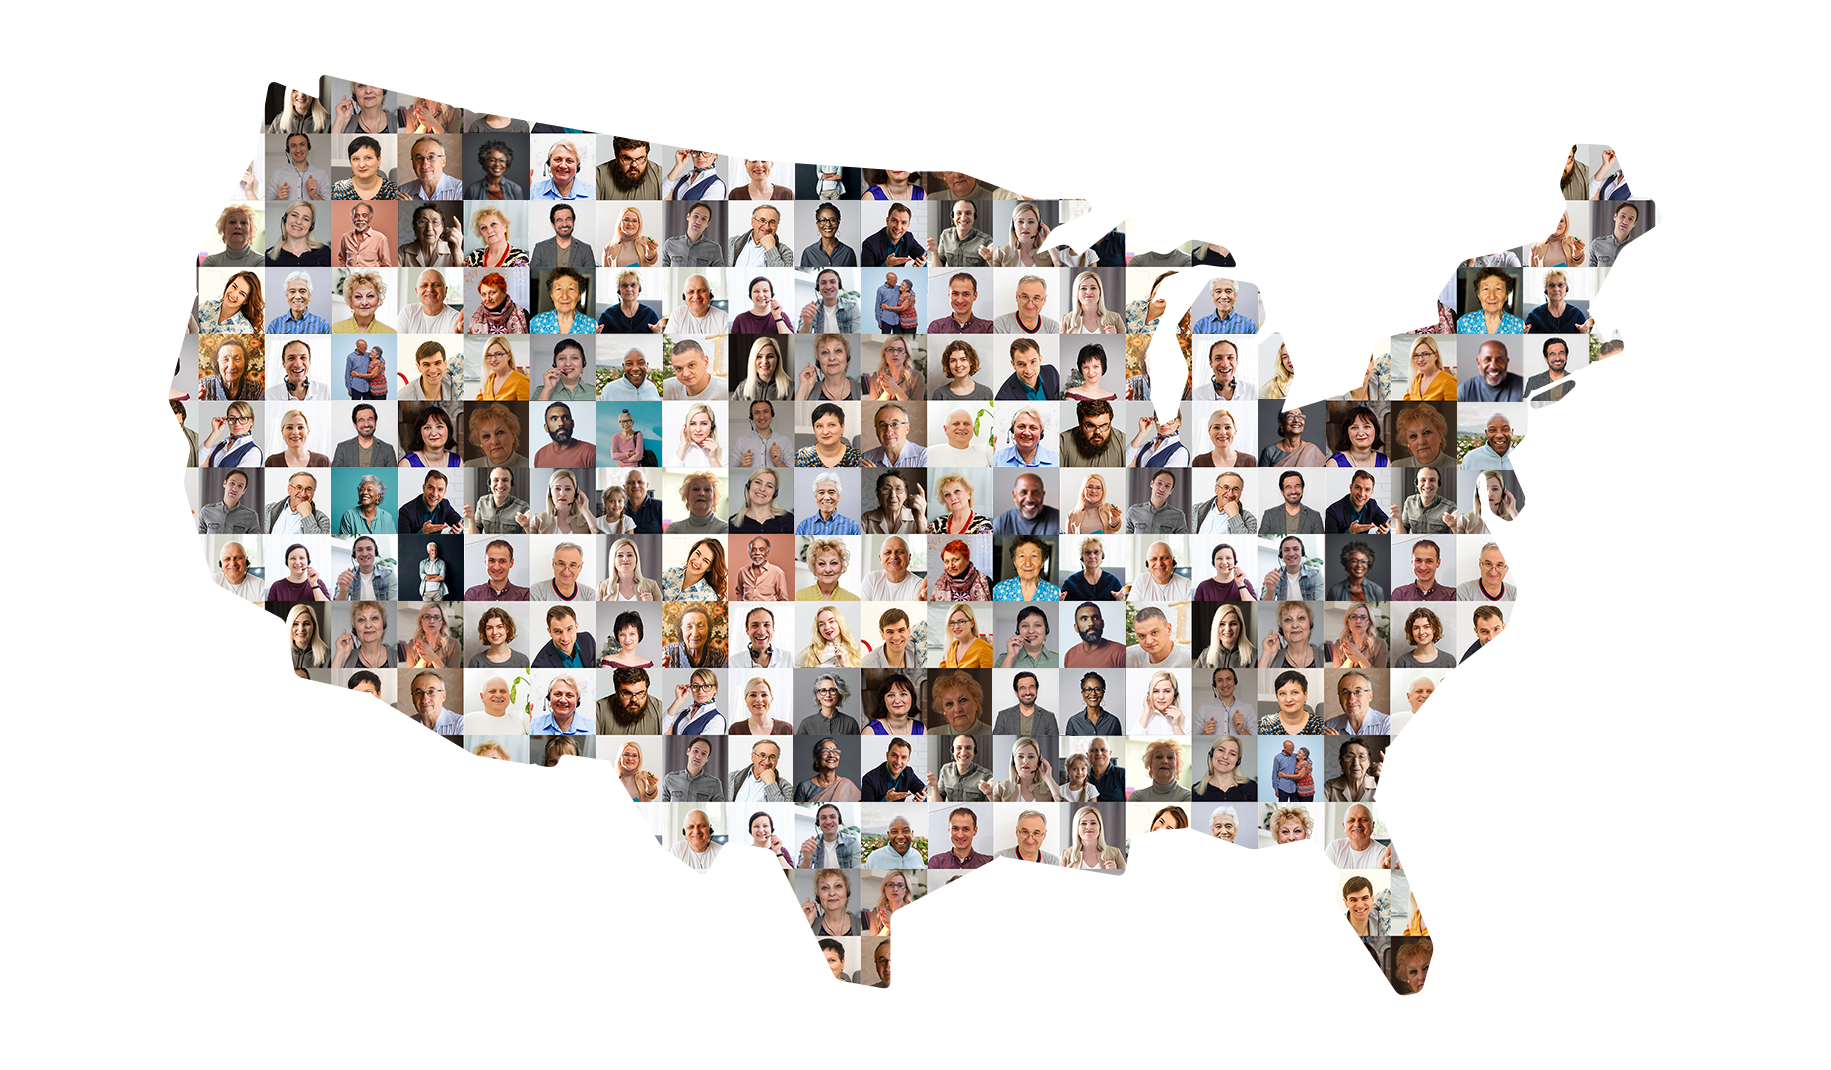 A map of the United States filled with a collage of diverse people’s faces.